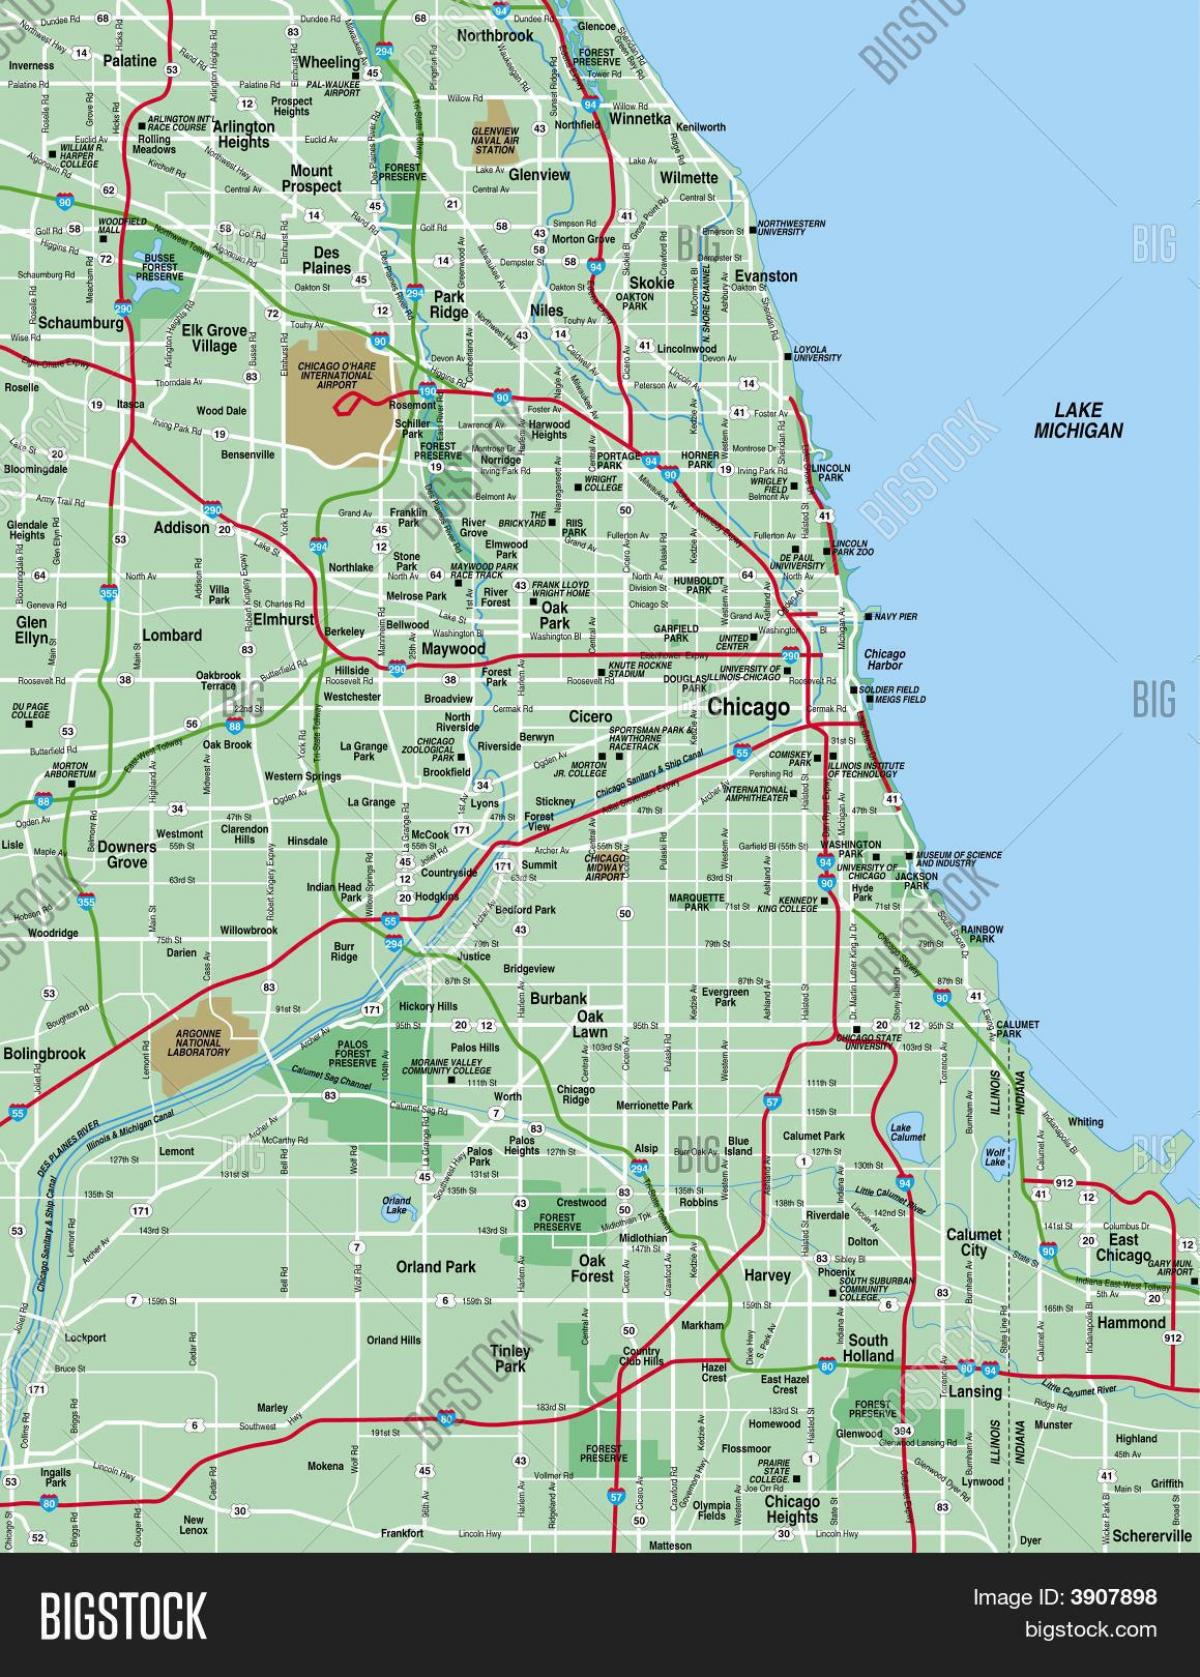 map Chicago area